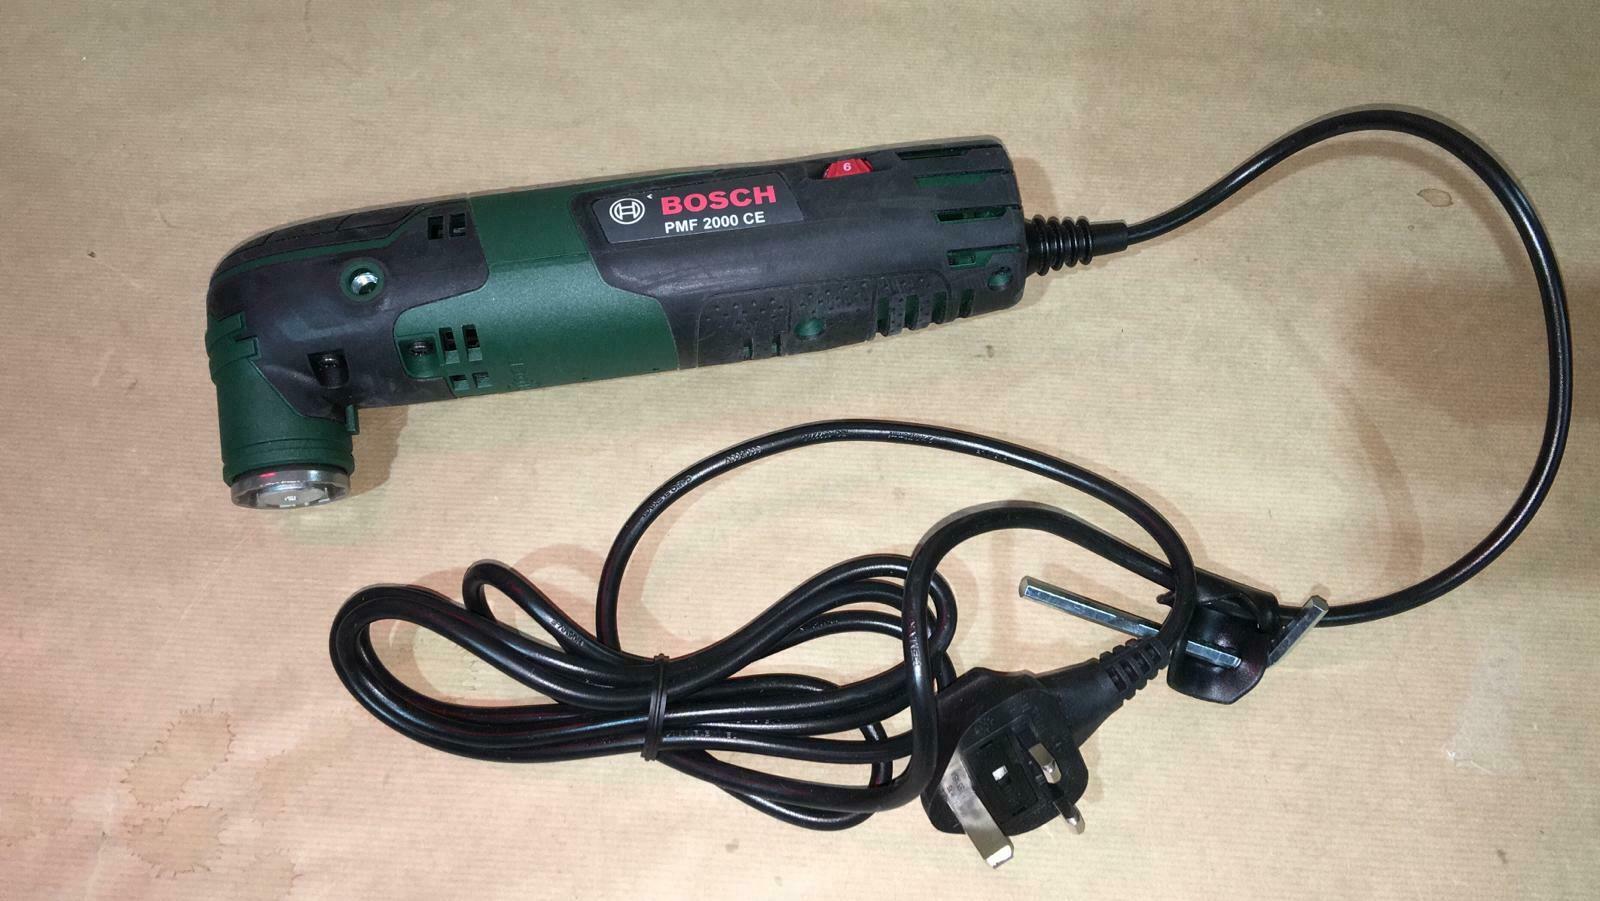 Bosch 240V 220W Corded Multi tool PMF 2000 CE - Used LN Missing Blades 5184